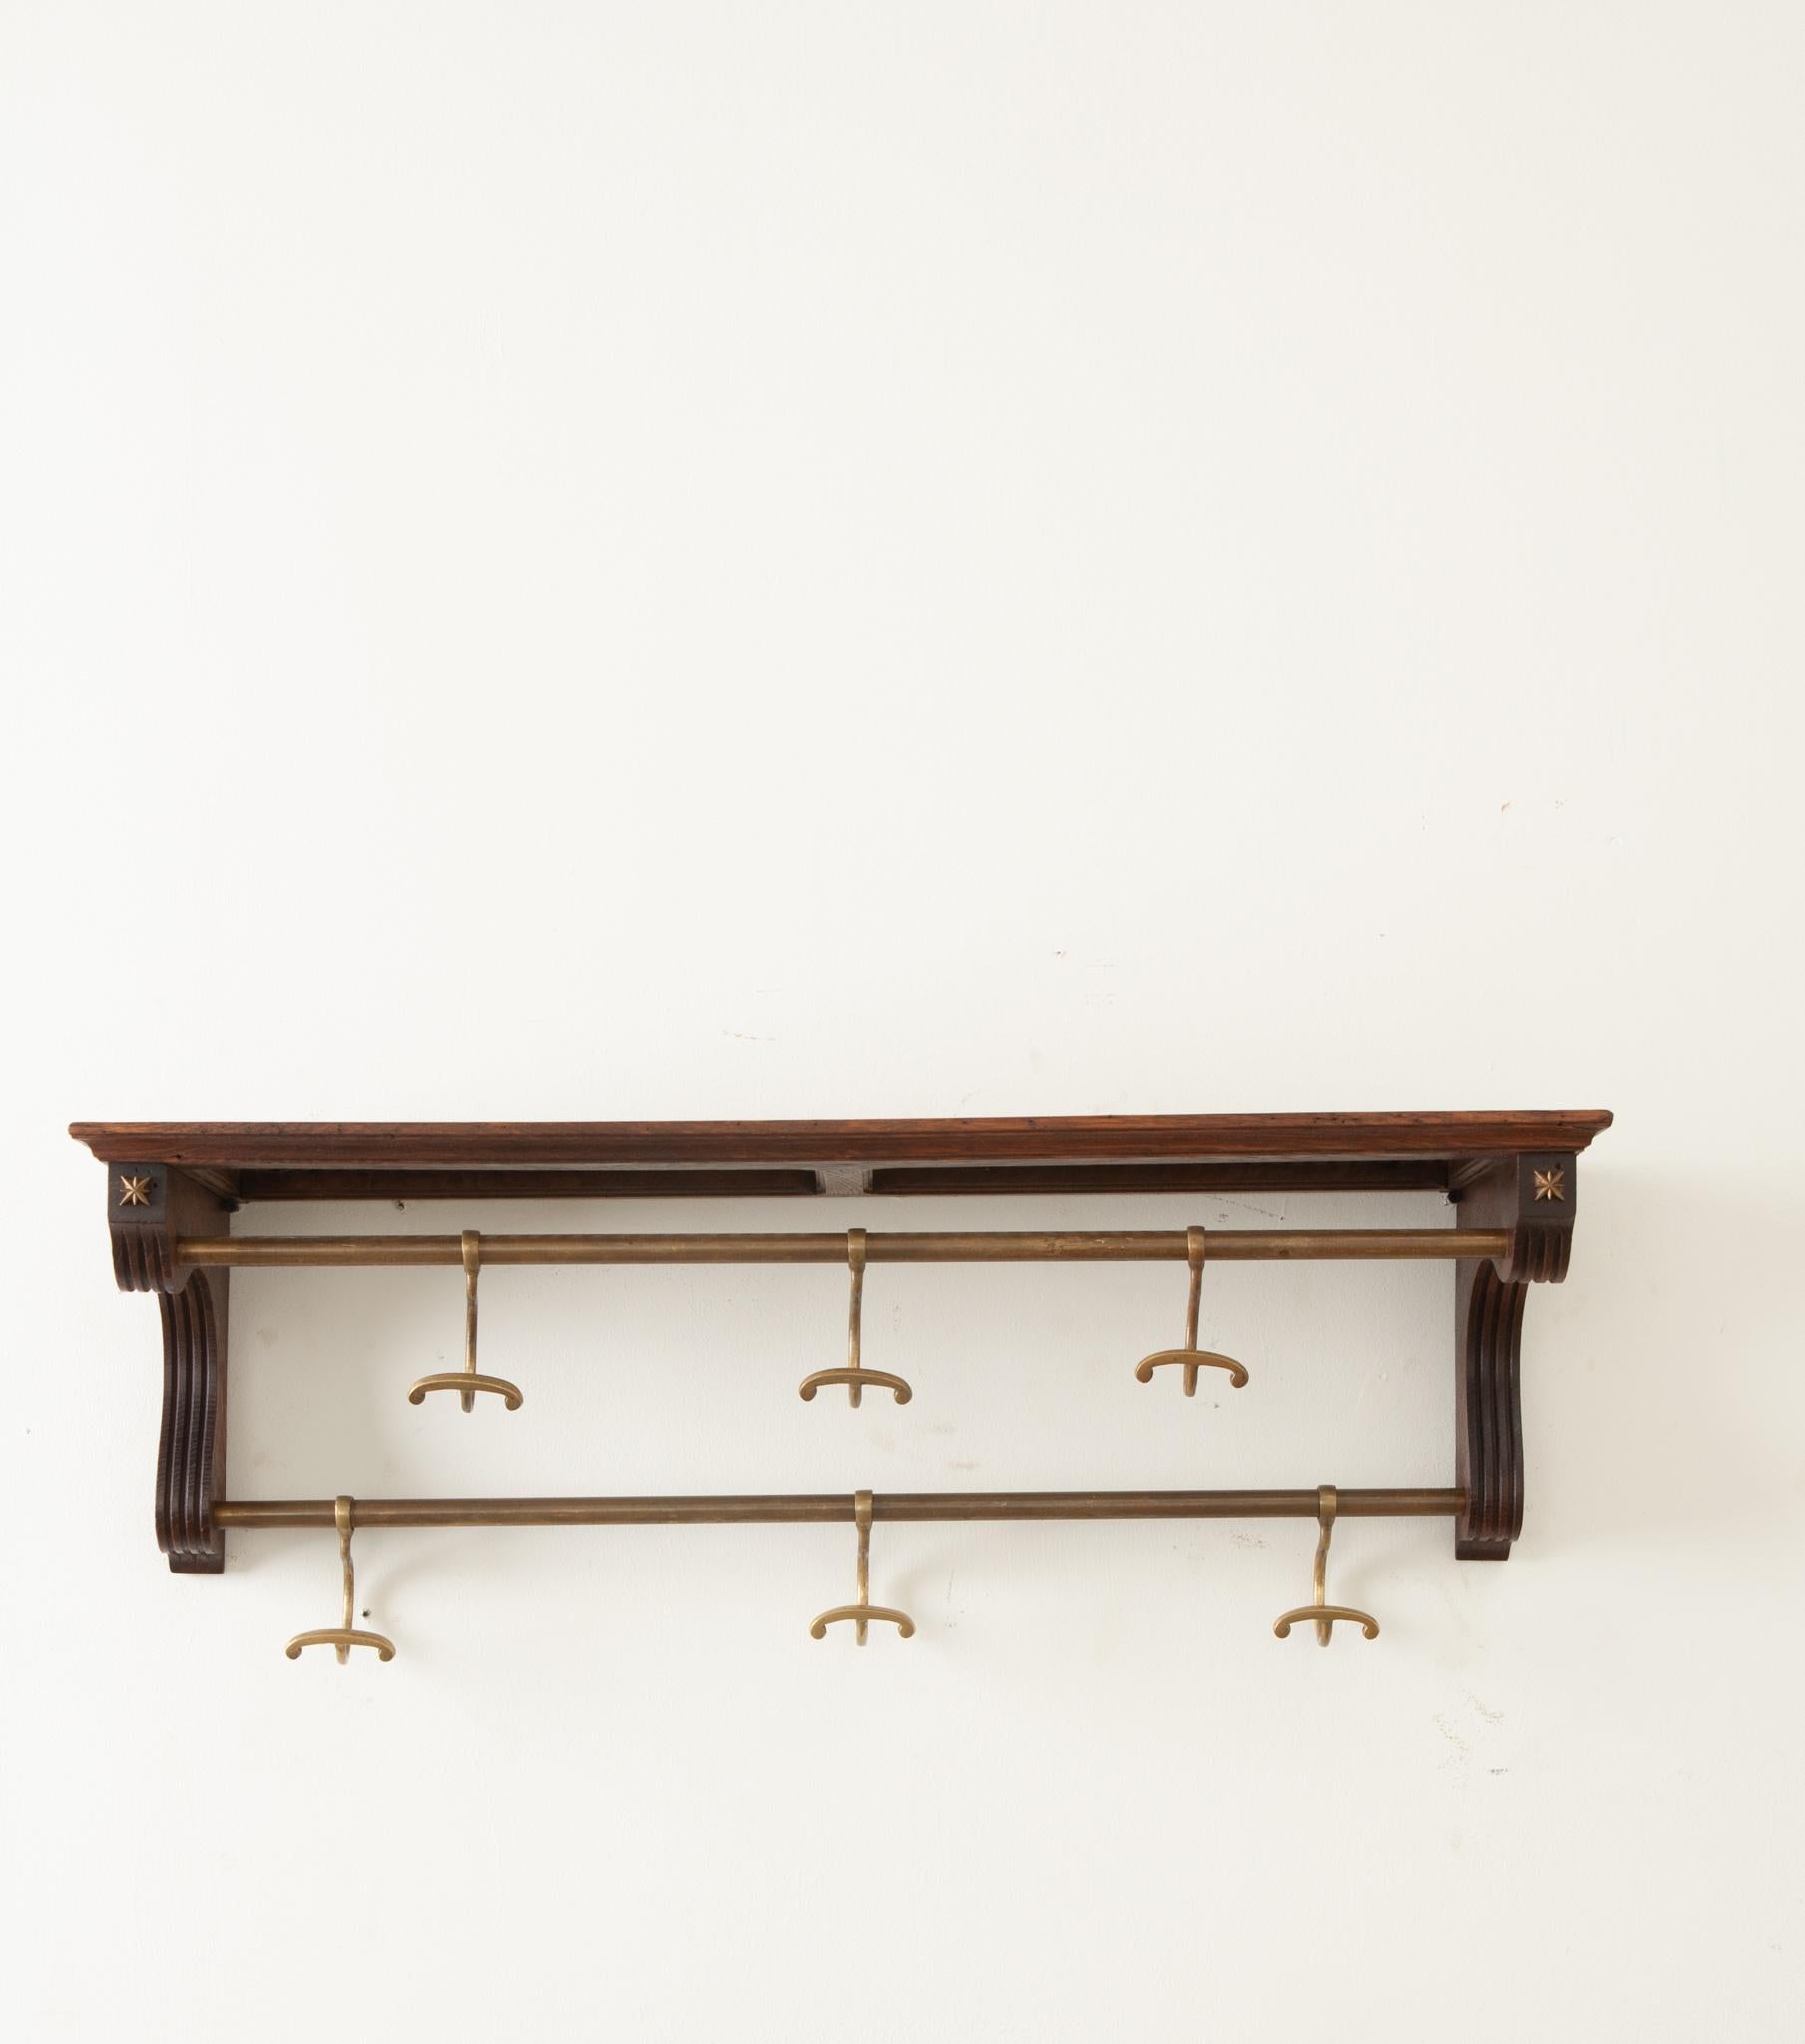 A French early 20th Century oak and brass train rack is the perfect shelf by your door or in your bathroom. The 9 ¾” top shelf is made of cane and is deep enough for hats or towels. There are six slidable hooks for hanging coats or towels. Be sure